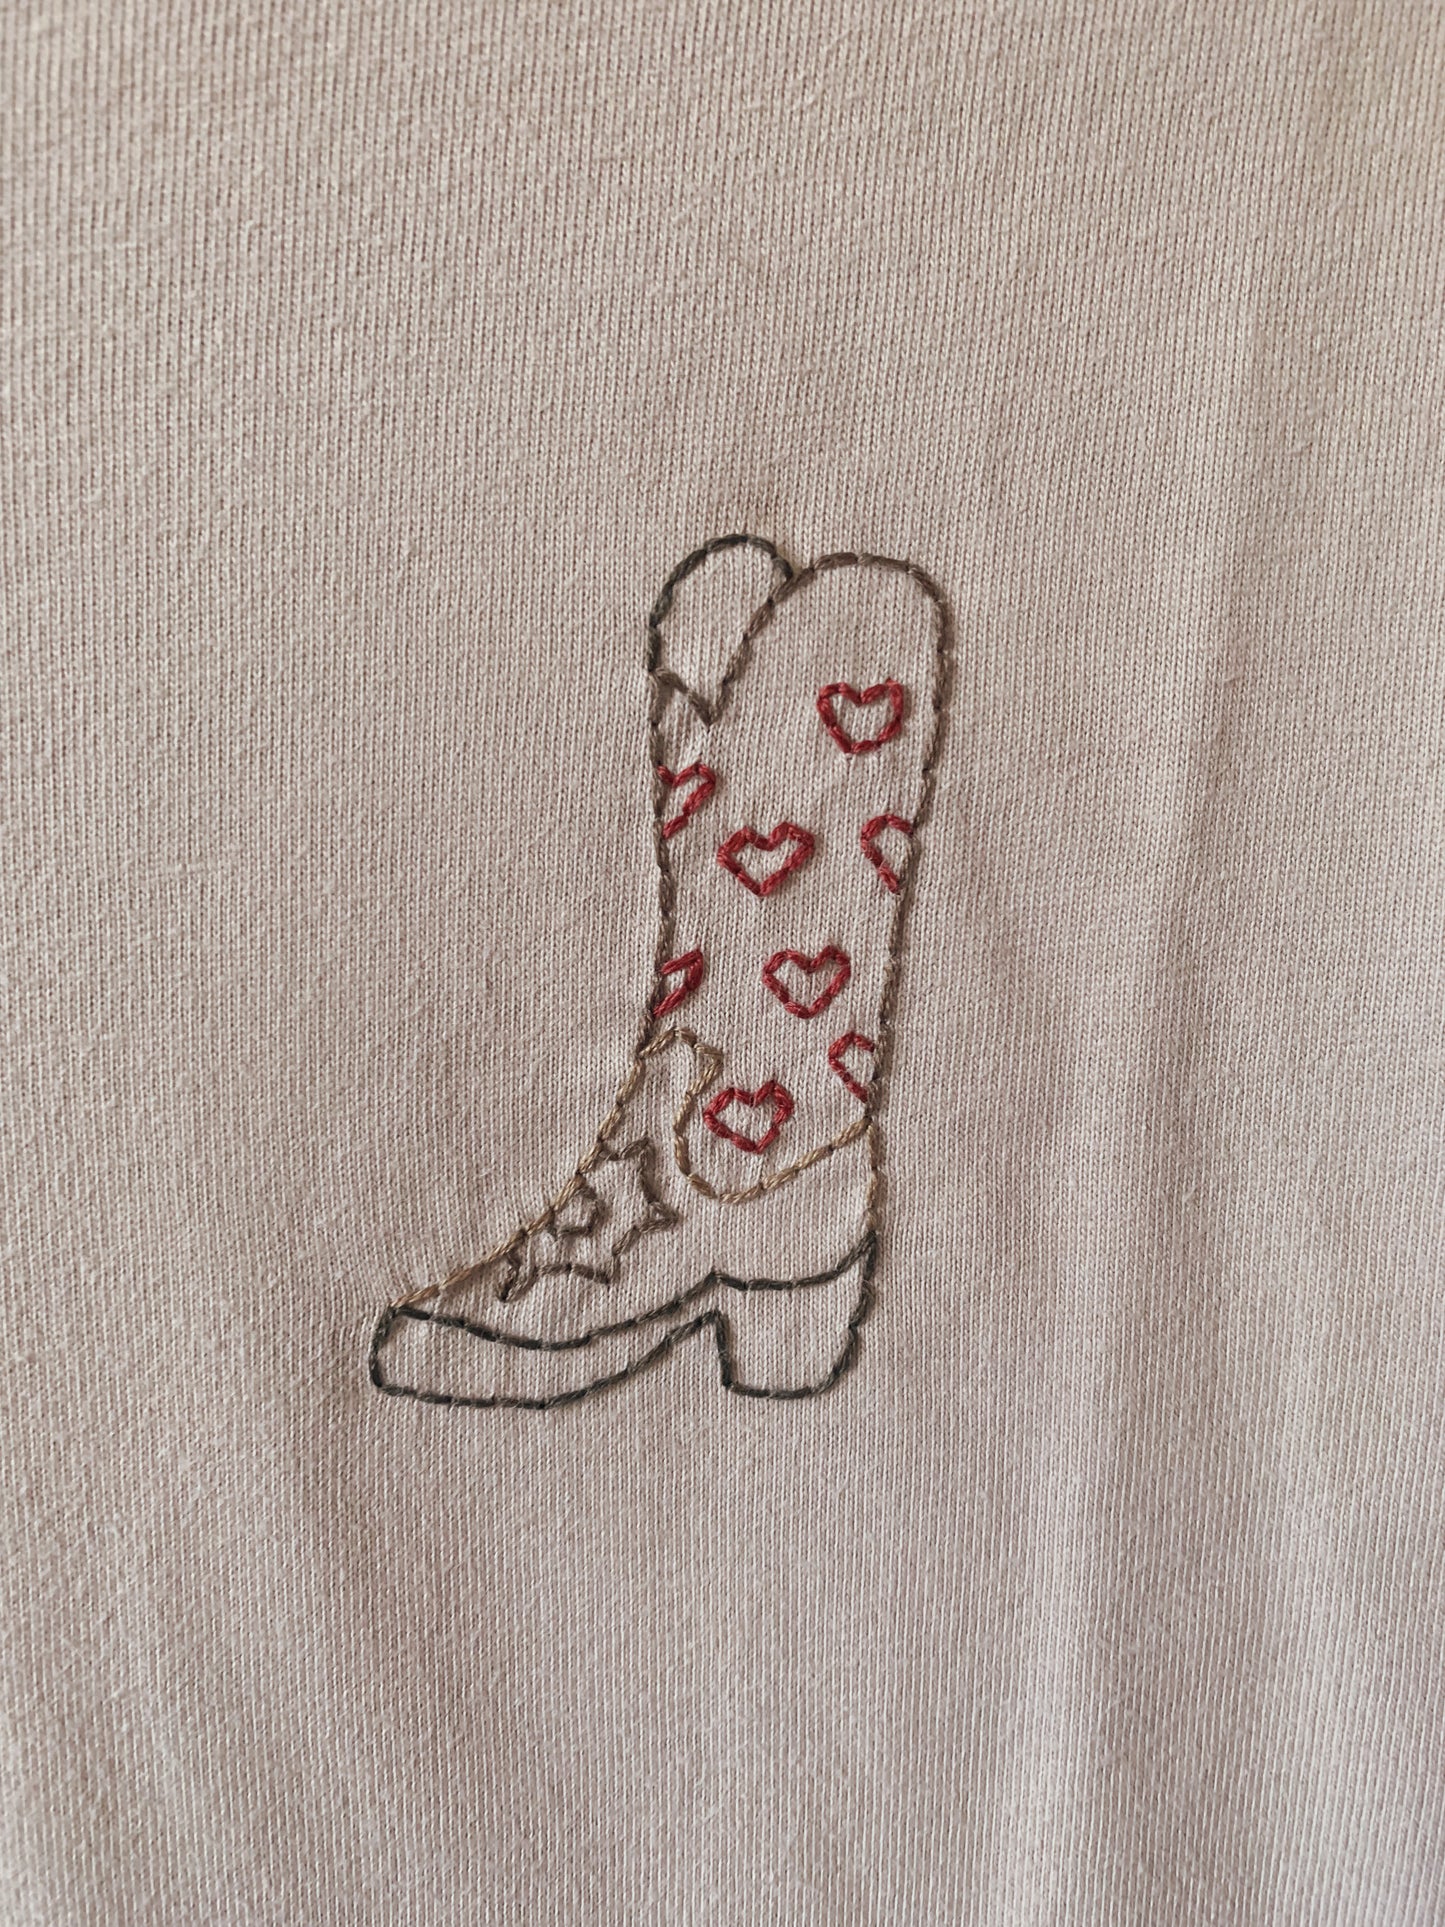 Cowboy Heart Boot Upcycled T-Shirt